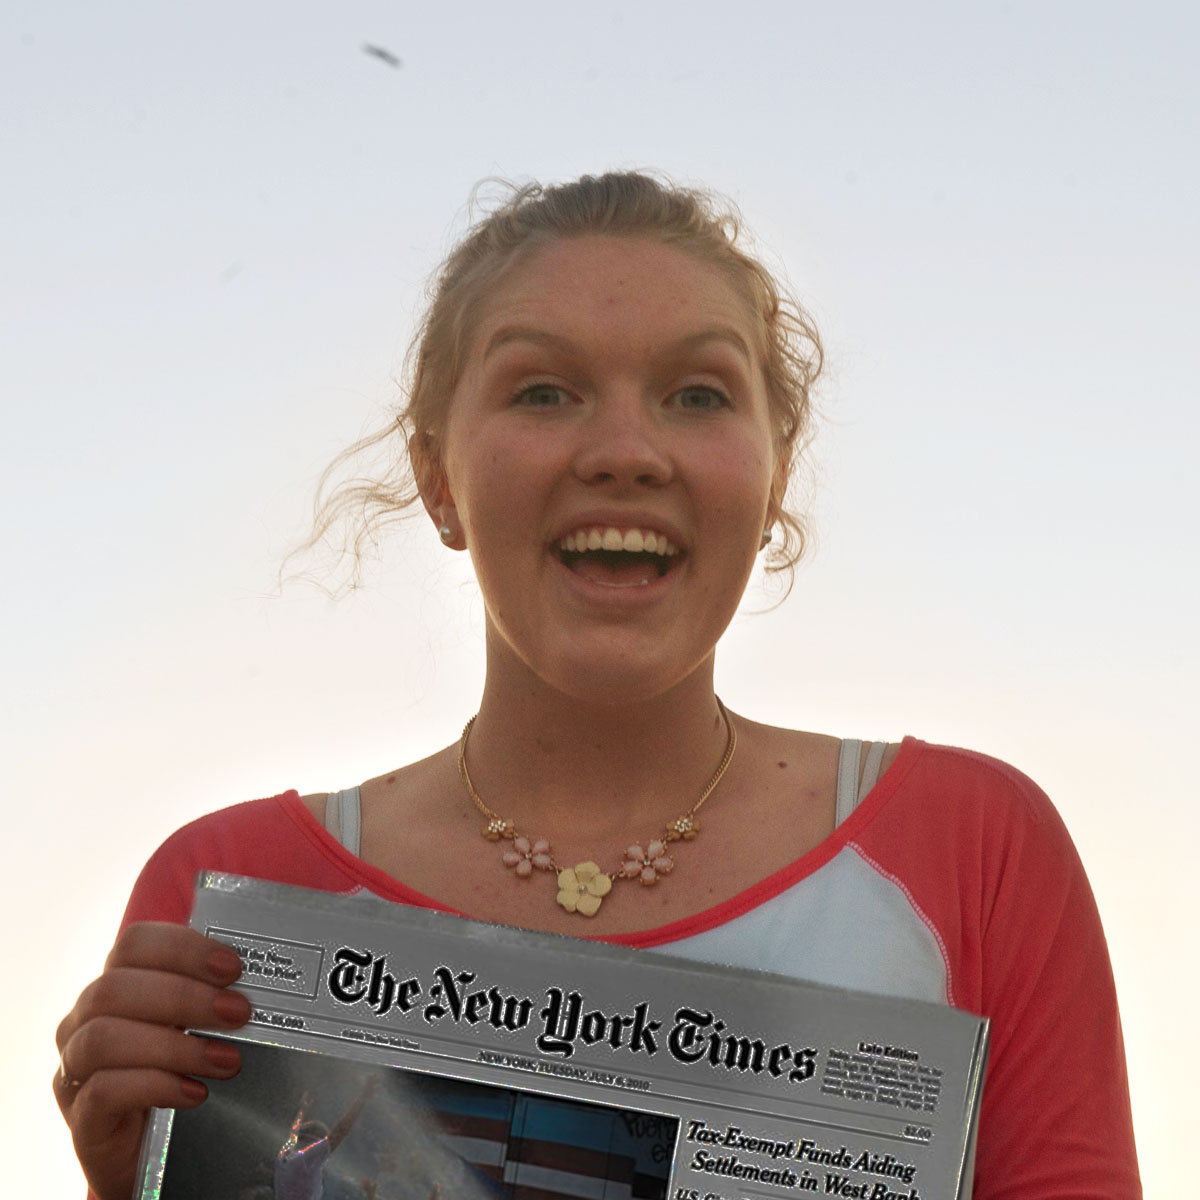 PHS student wins runner up in New York Times contest Payson High School